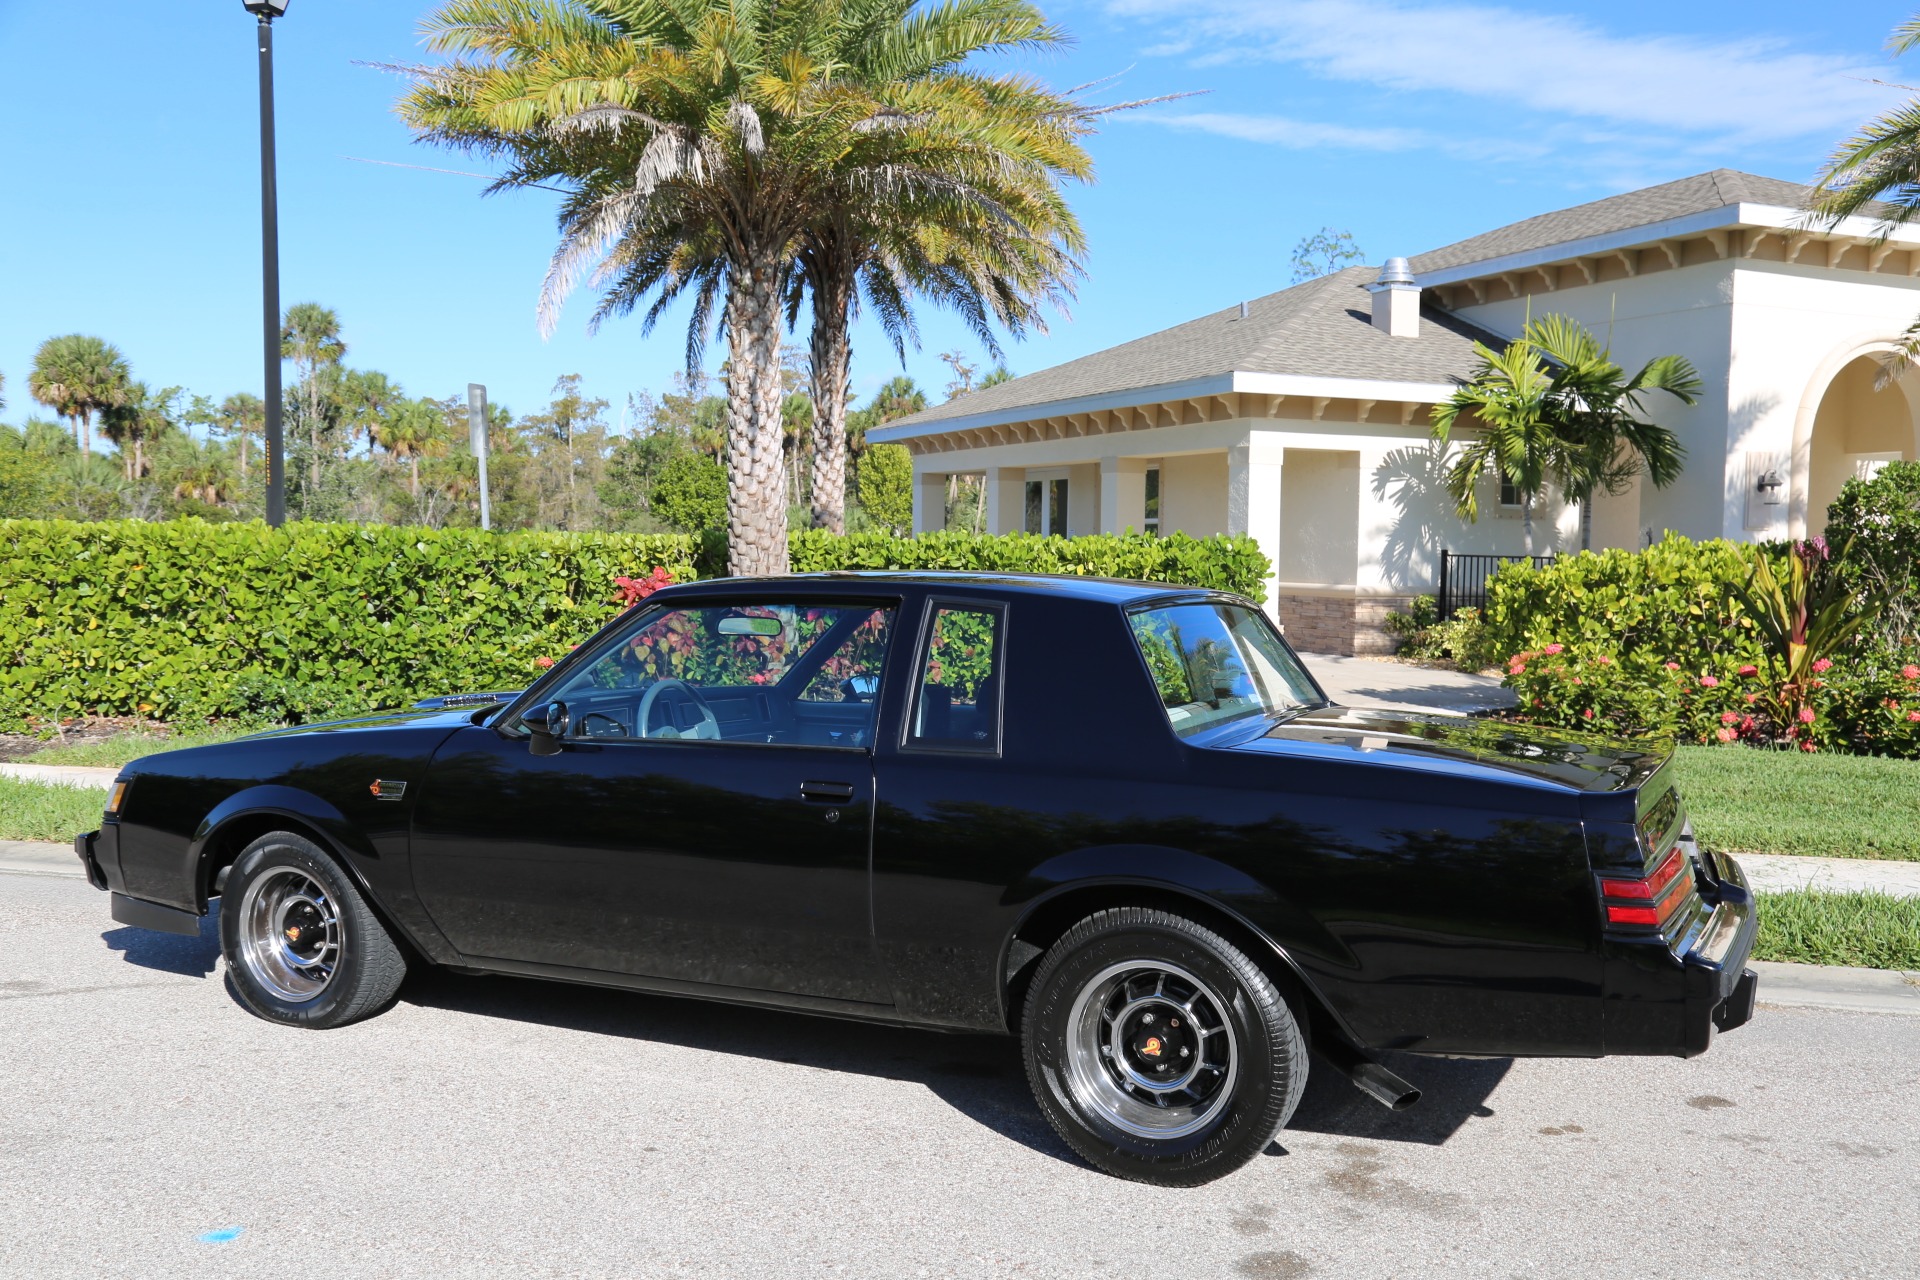 Used 1987 Buick Grand National Turbo Grand National Turbo for sale Sold at Muscle Cars for Sale Inc. in Fort Myers FL 33912 4